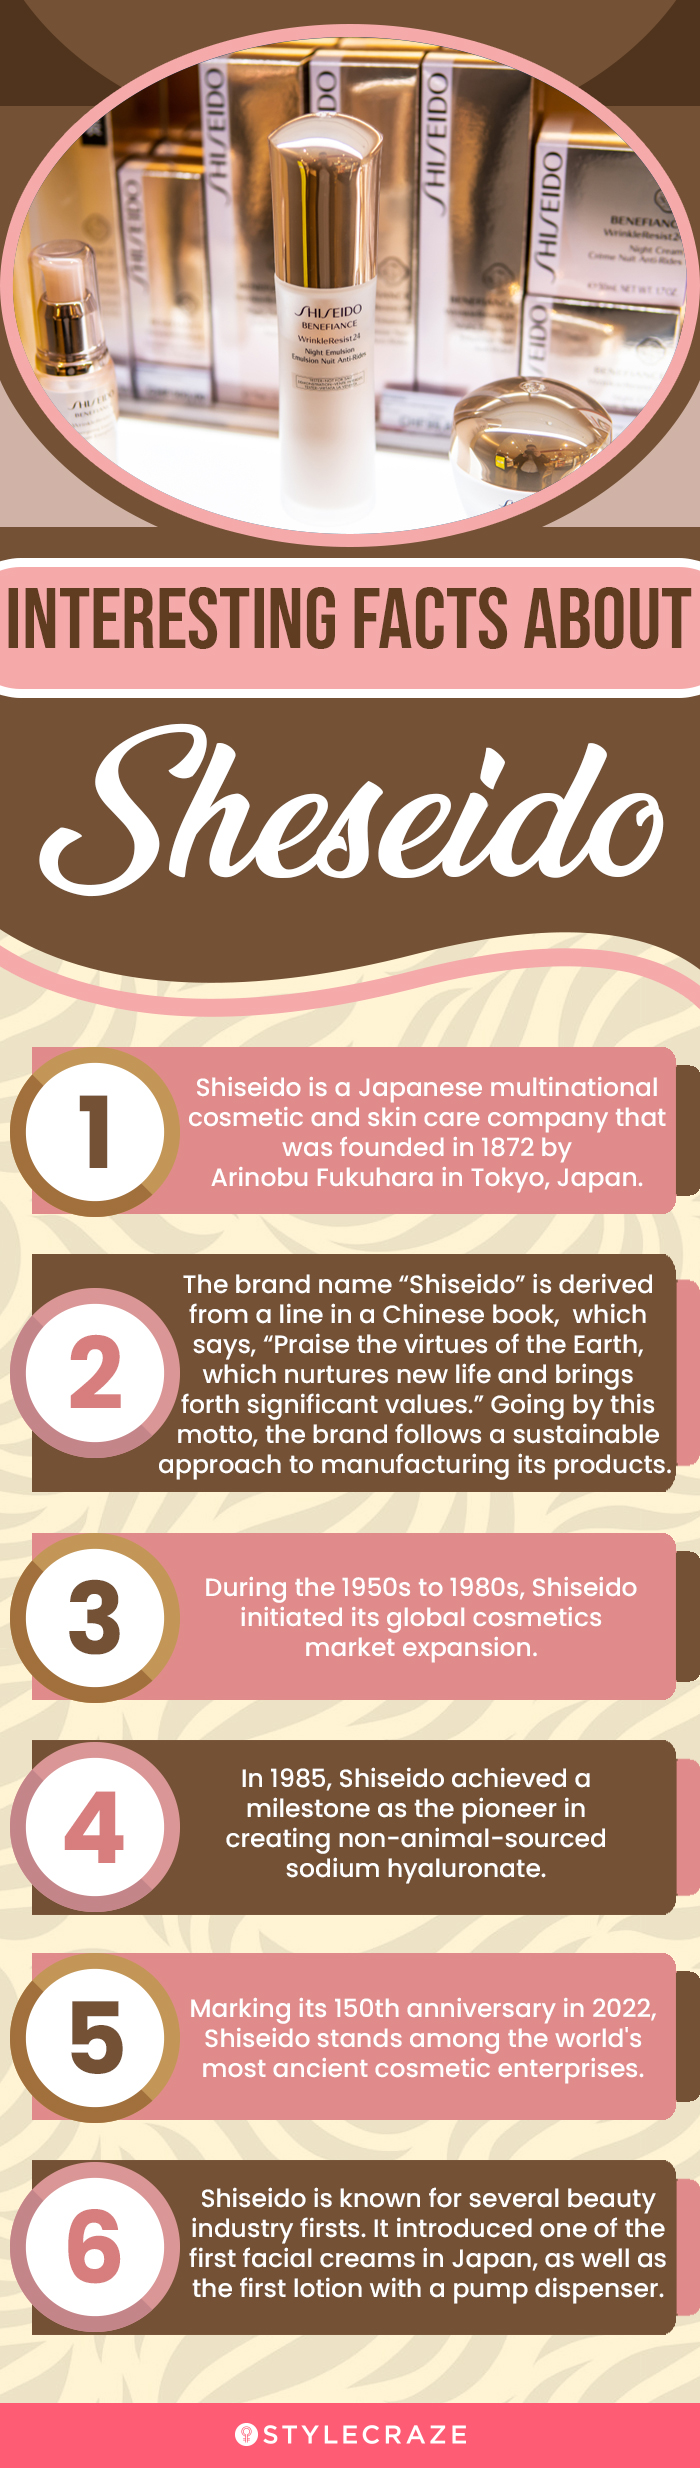 Interesting Facts About Sheseido (infographic)